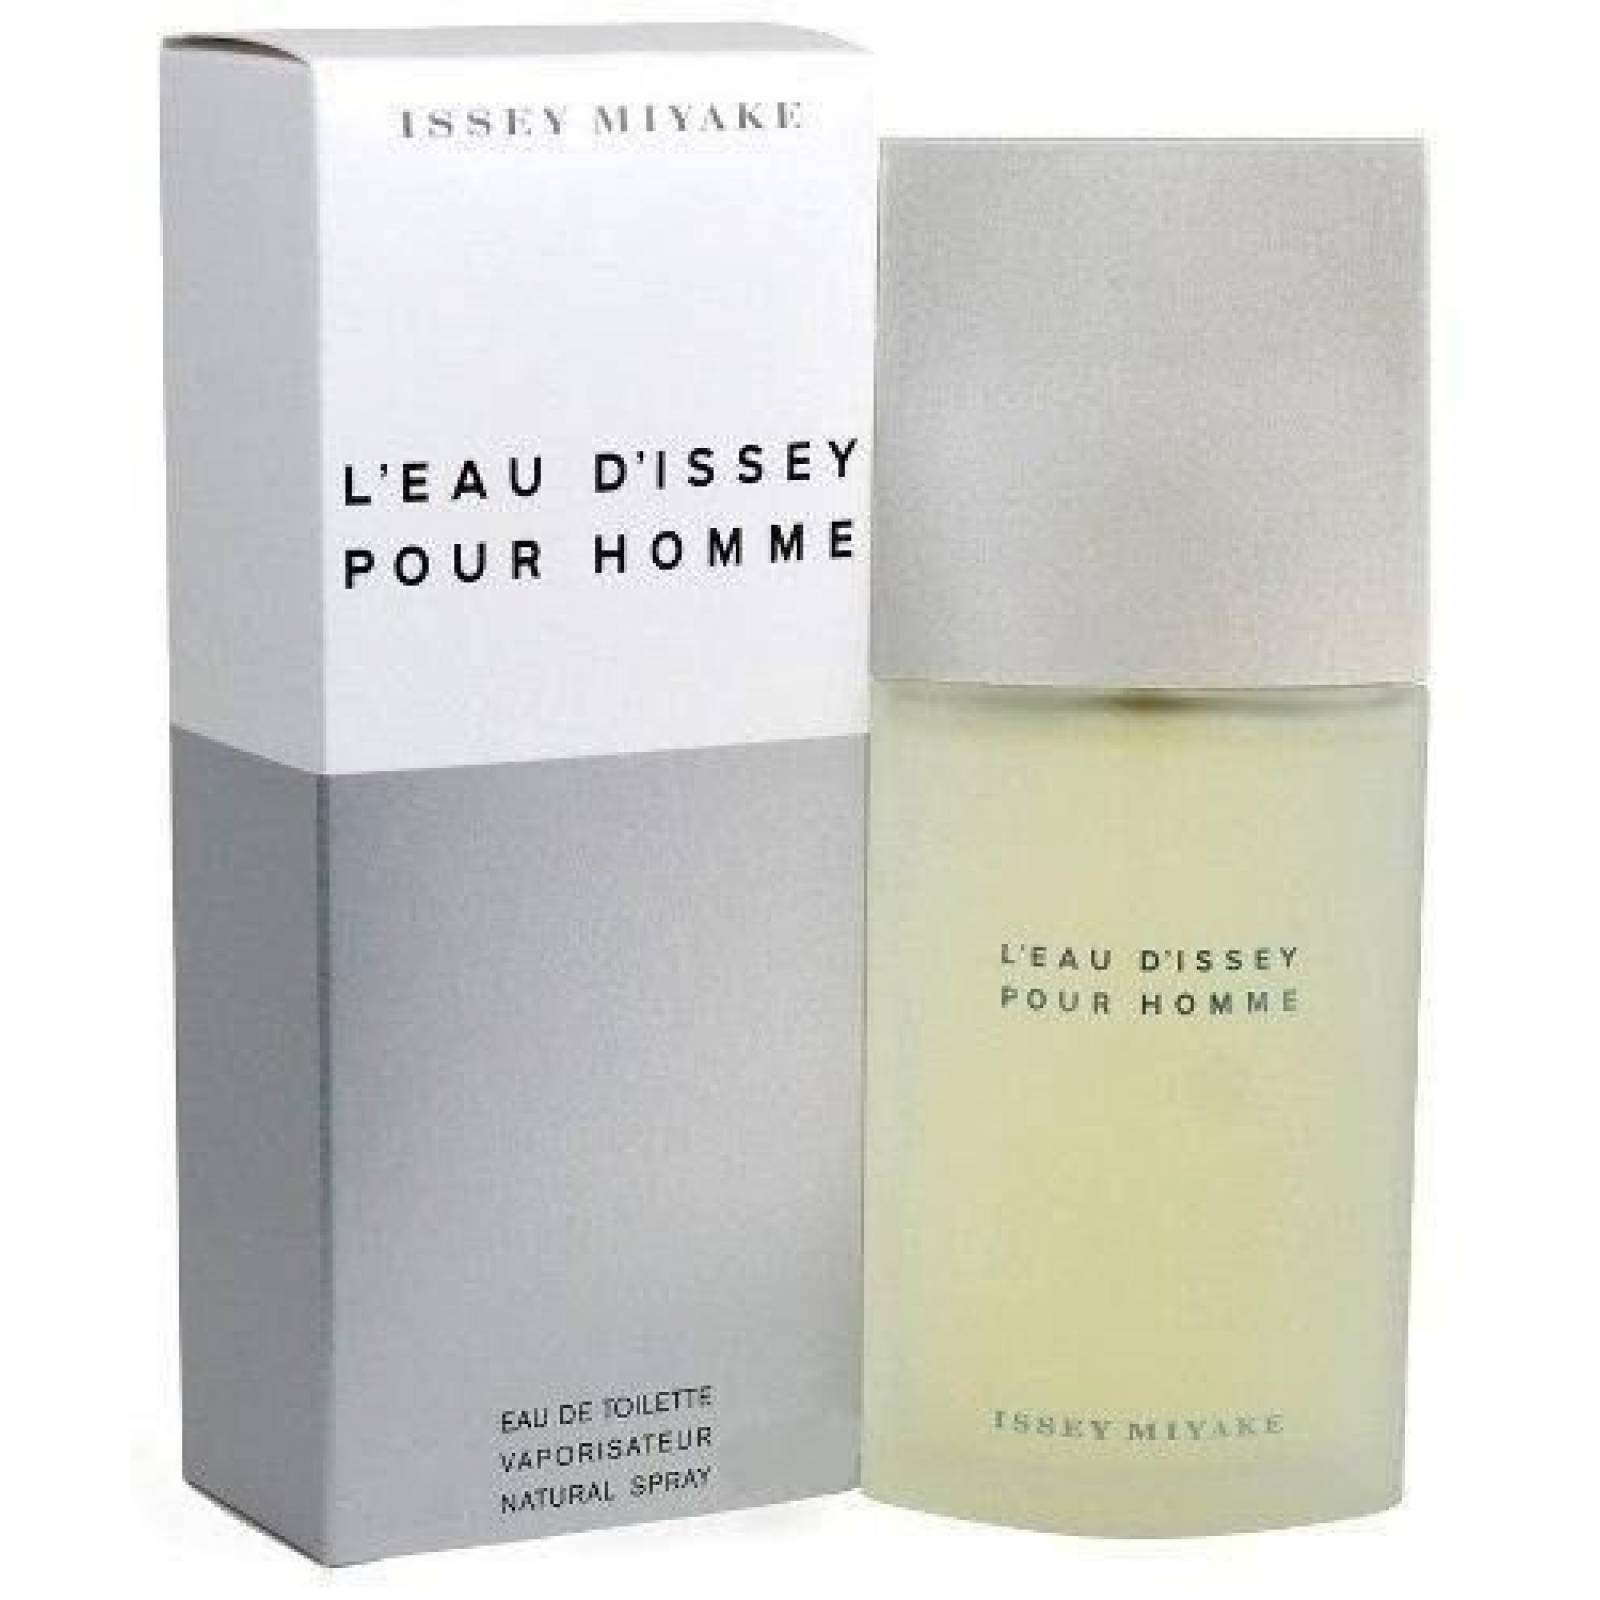 L Eau D Issey Pour Homme Caballero 125 Ml Issey Miyake Spray